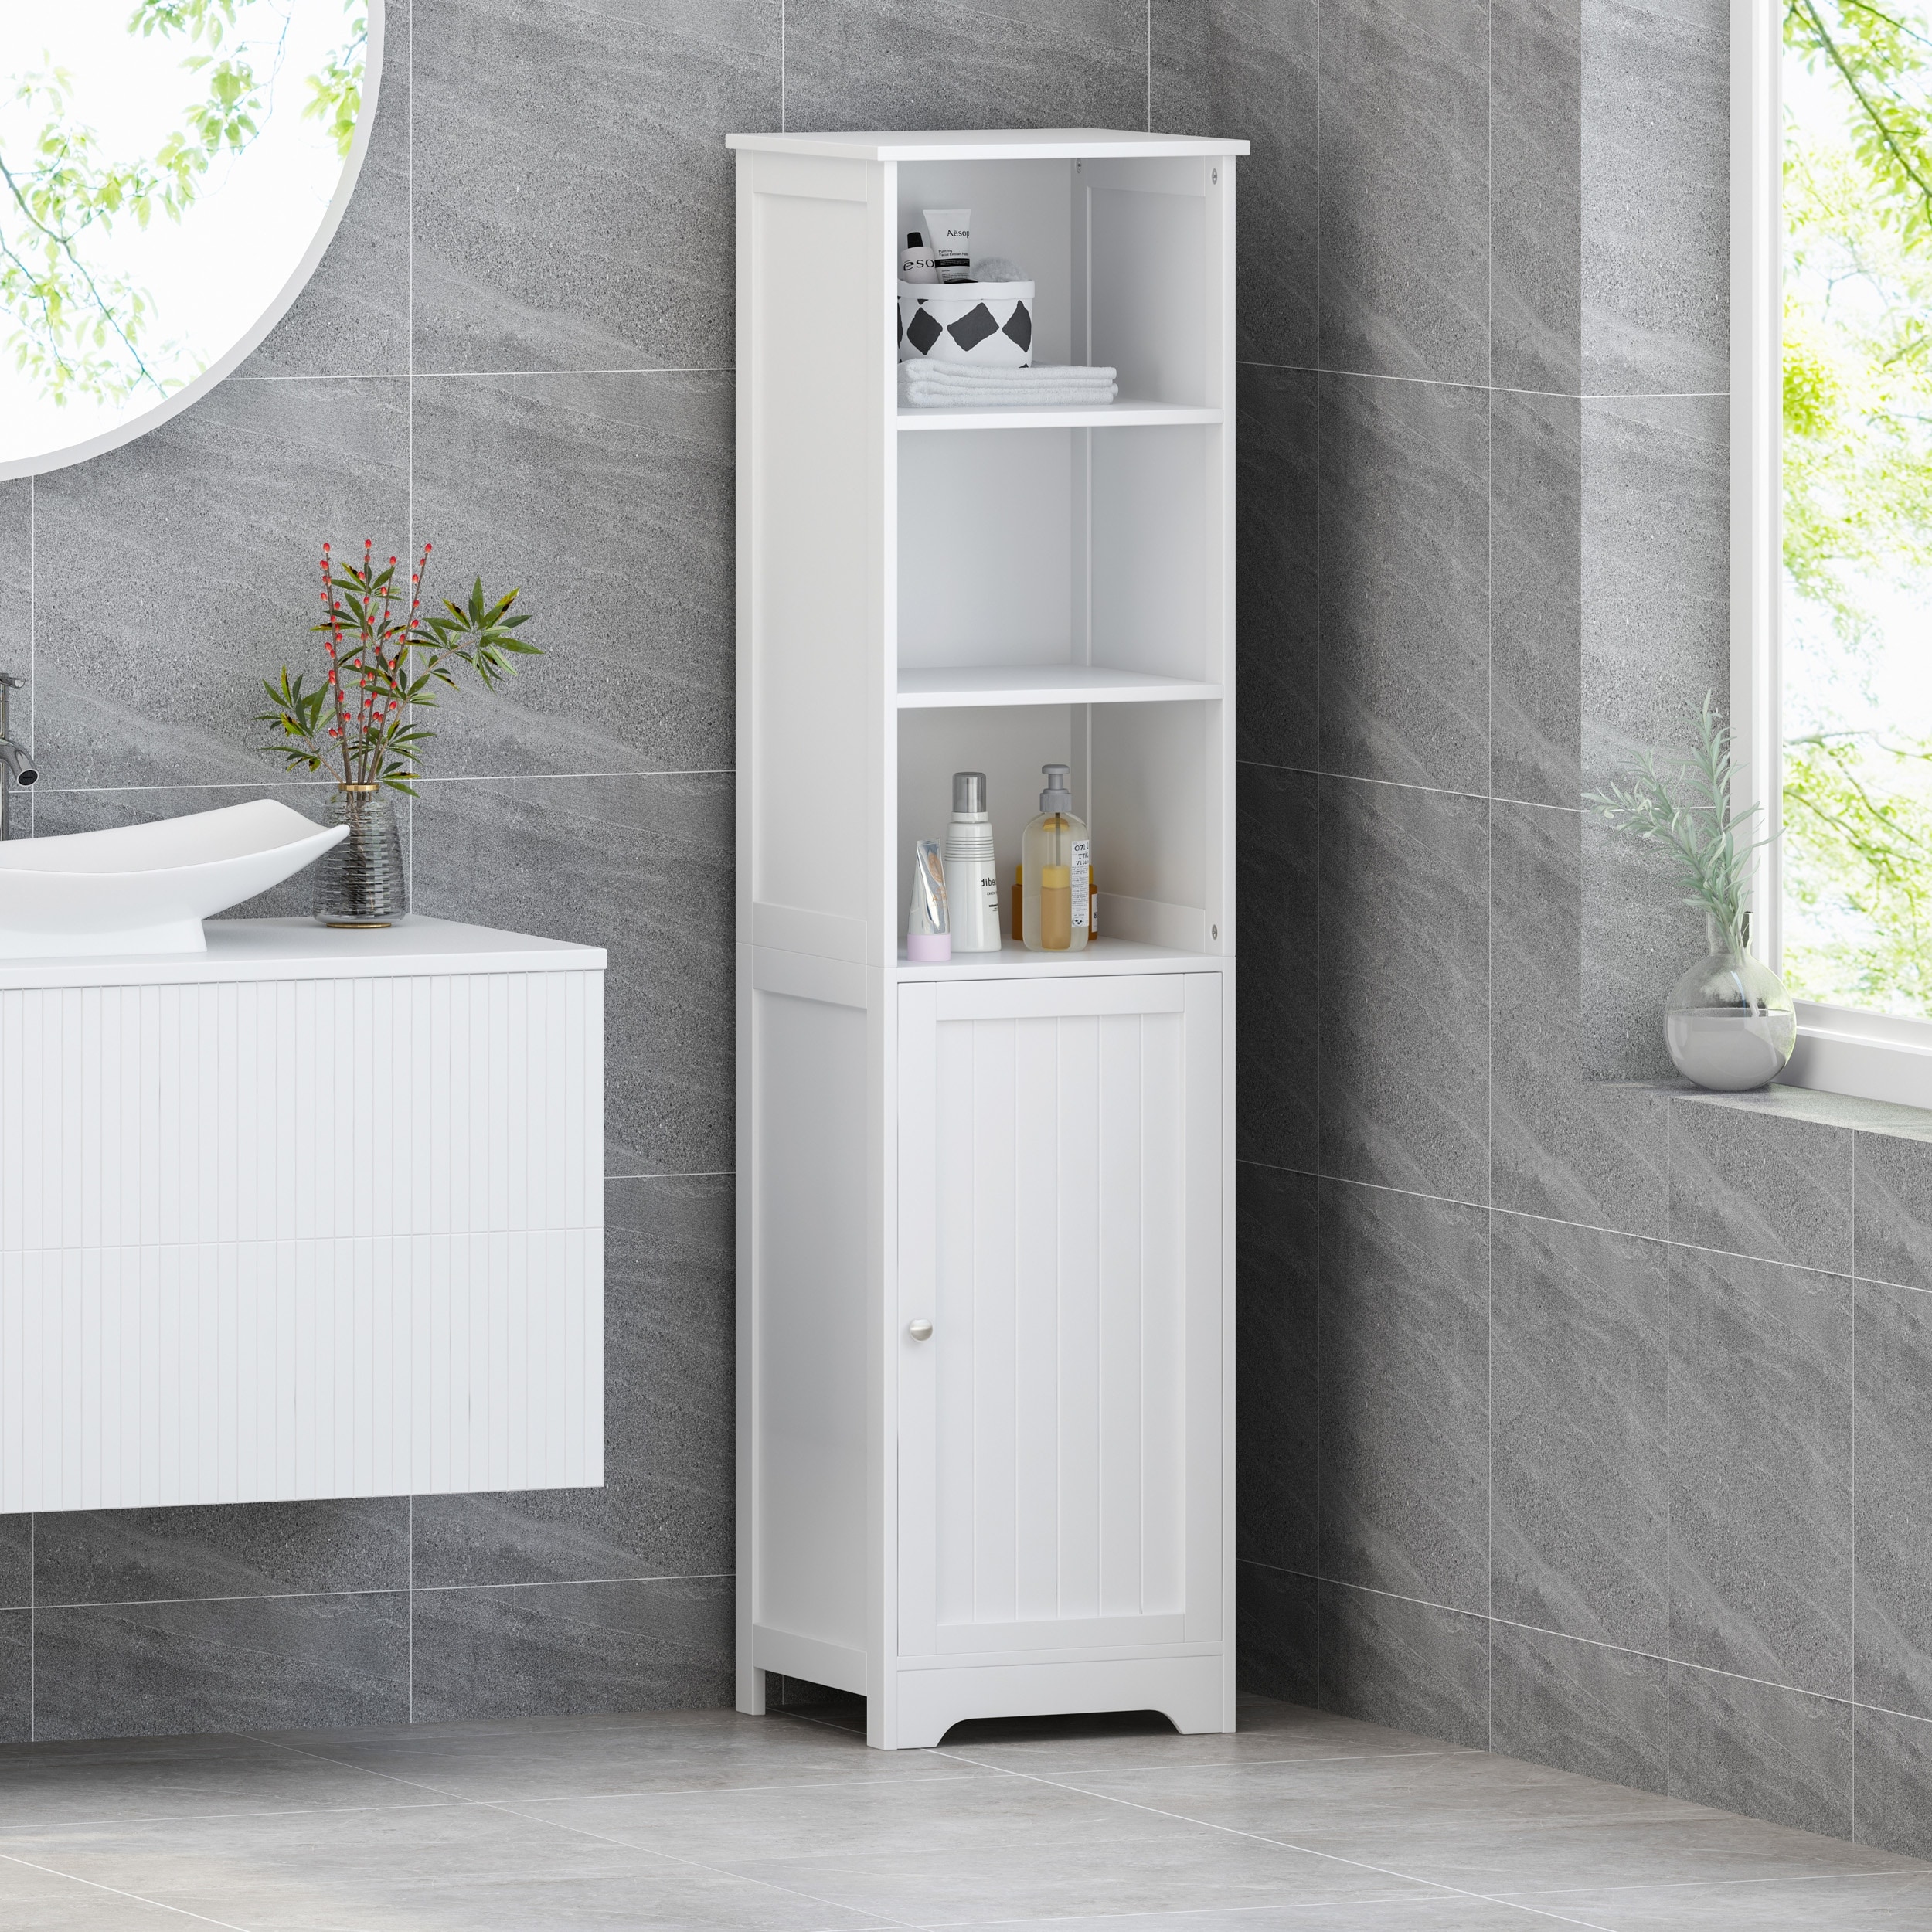 Heineberg Free-standing Bathroom Storage Cabinet by Christopher Knight Home  - Overstock - 29816869